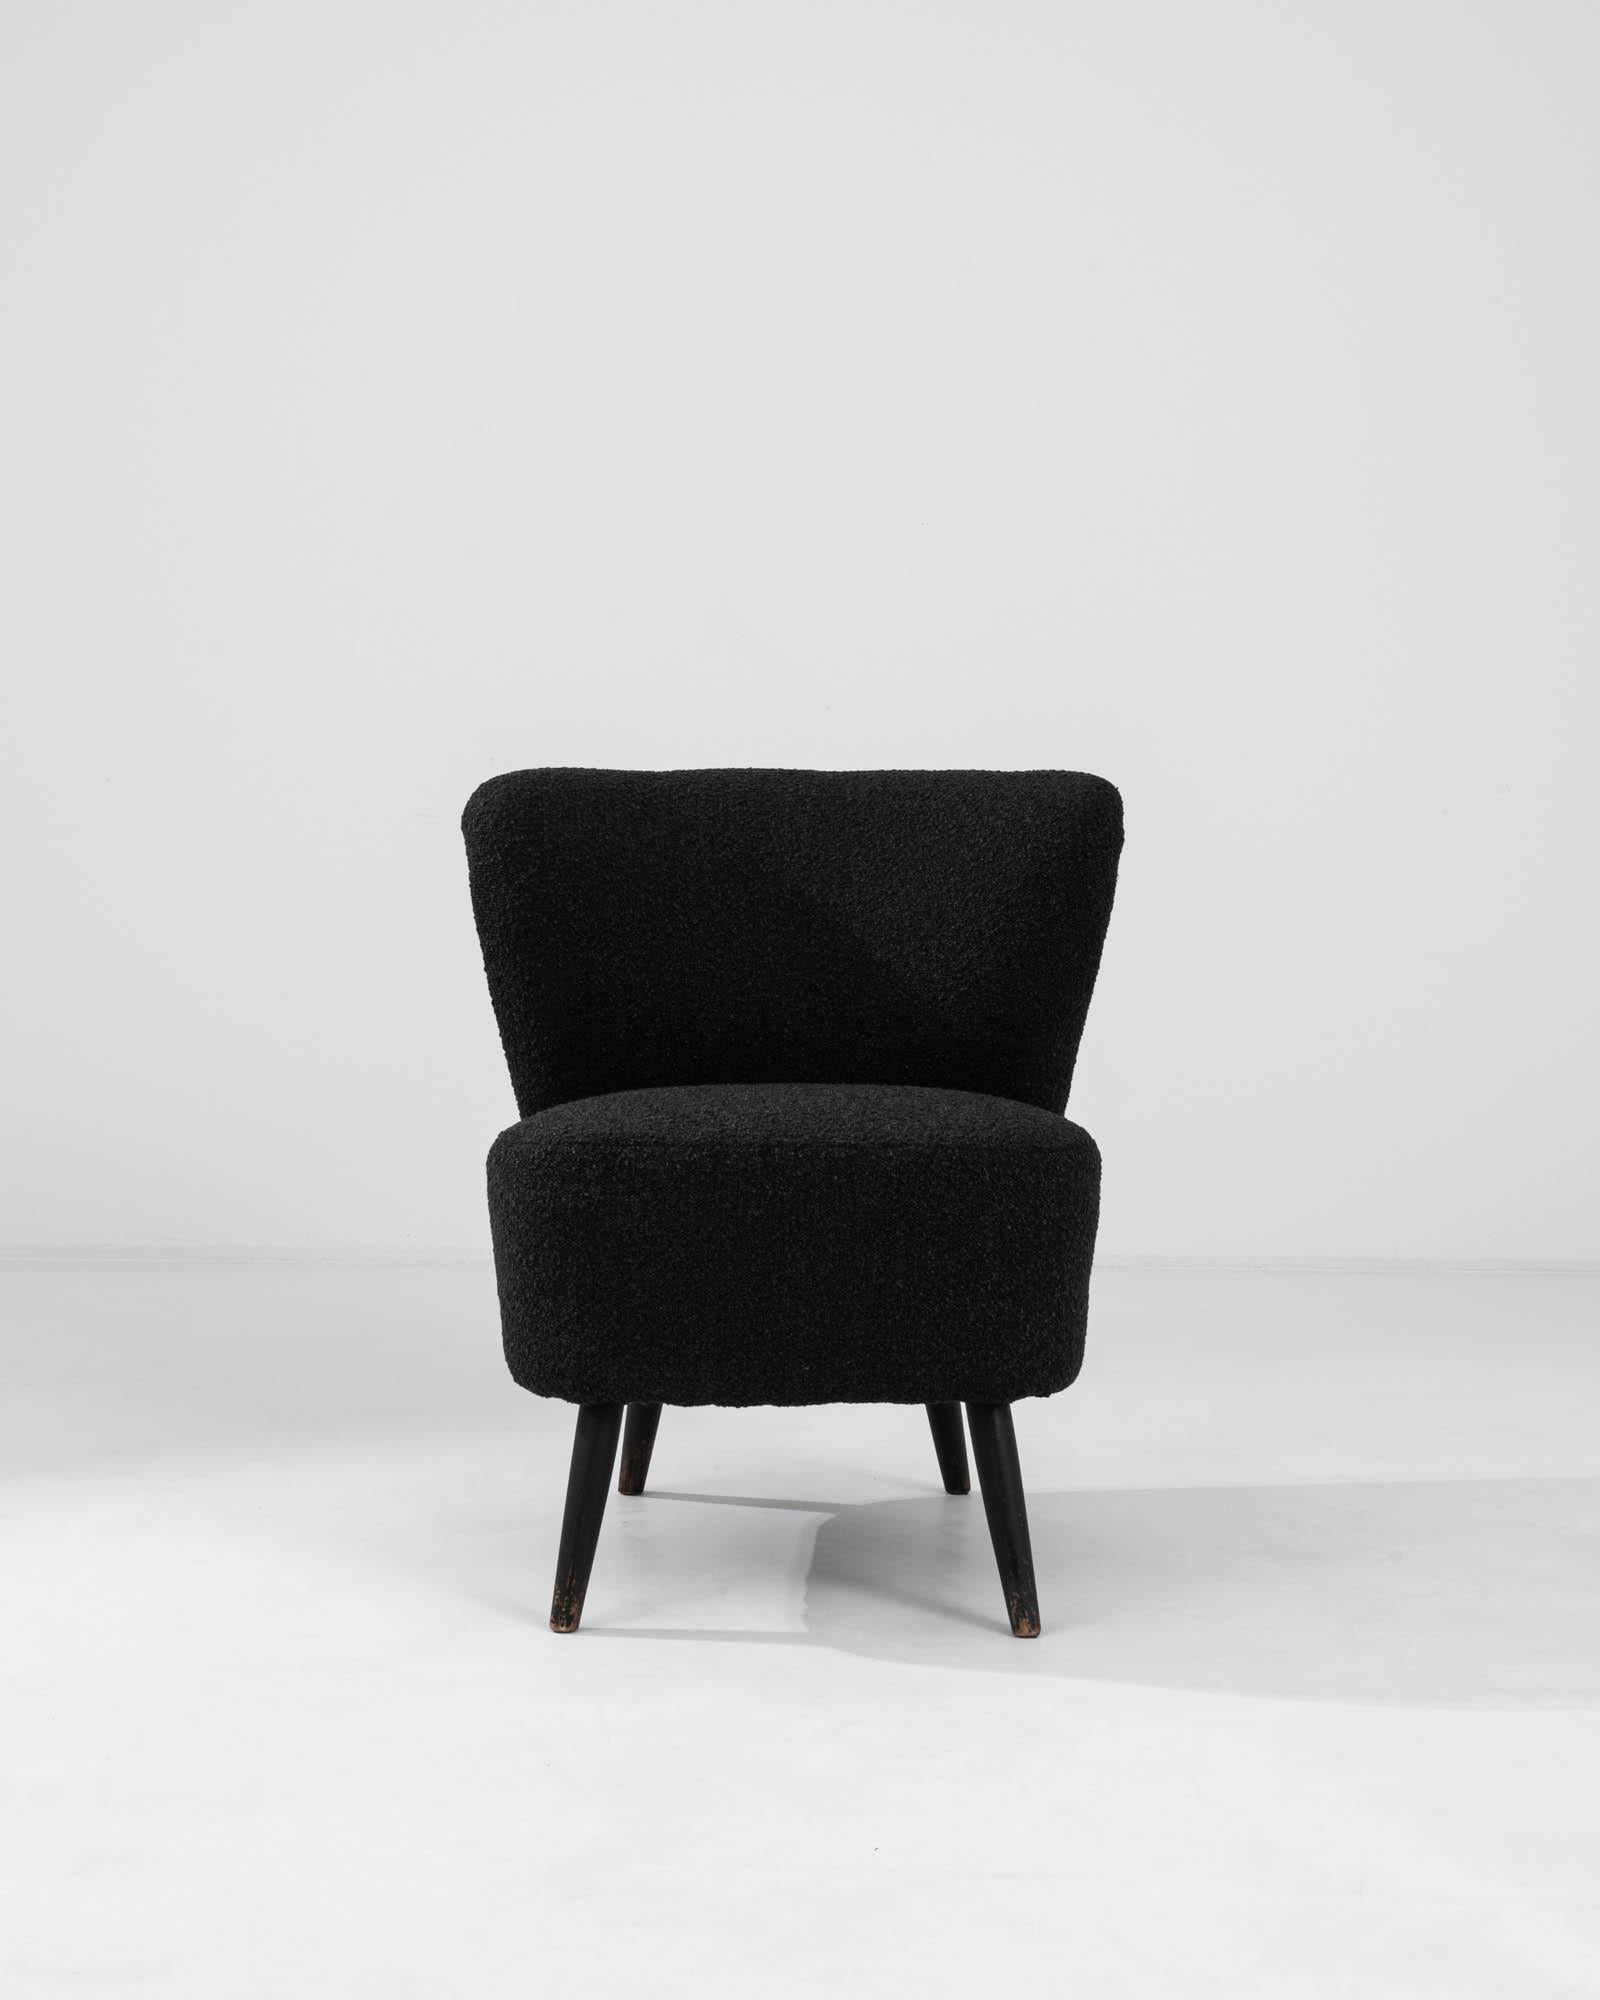 Introducing the 20th Century Danish Upholstered Chair, a fusion of minimalist design and comfort that brings a touch of Scandinavian sophistication to any room. This mid-century modern gem features a sleek, organic wooden frame complemented by a